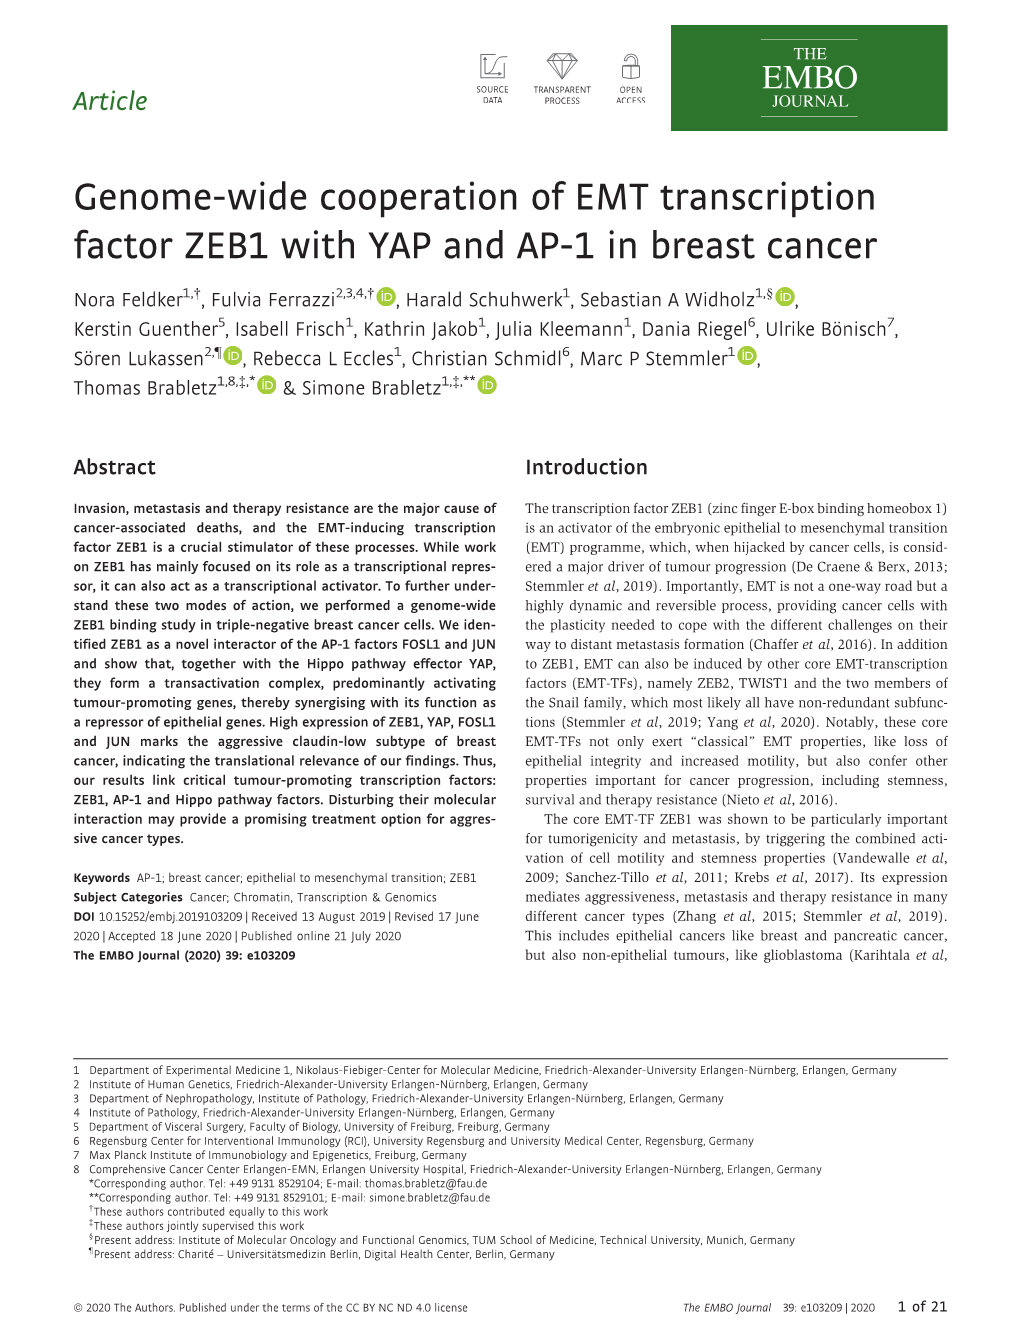 Genome‐Wide Cooperation of EMT Transcription Factor ZEB1 with YAP